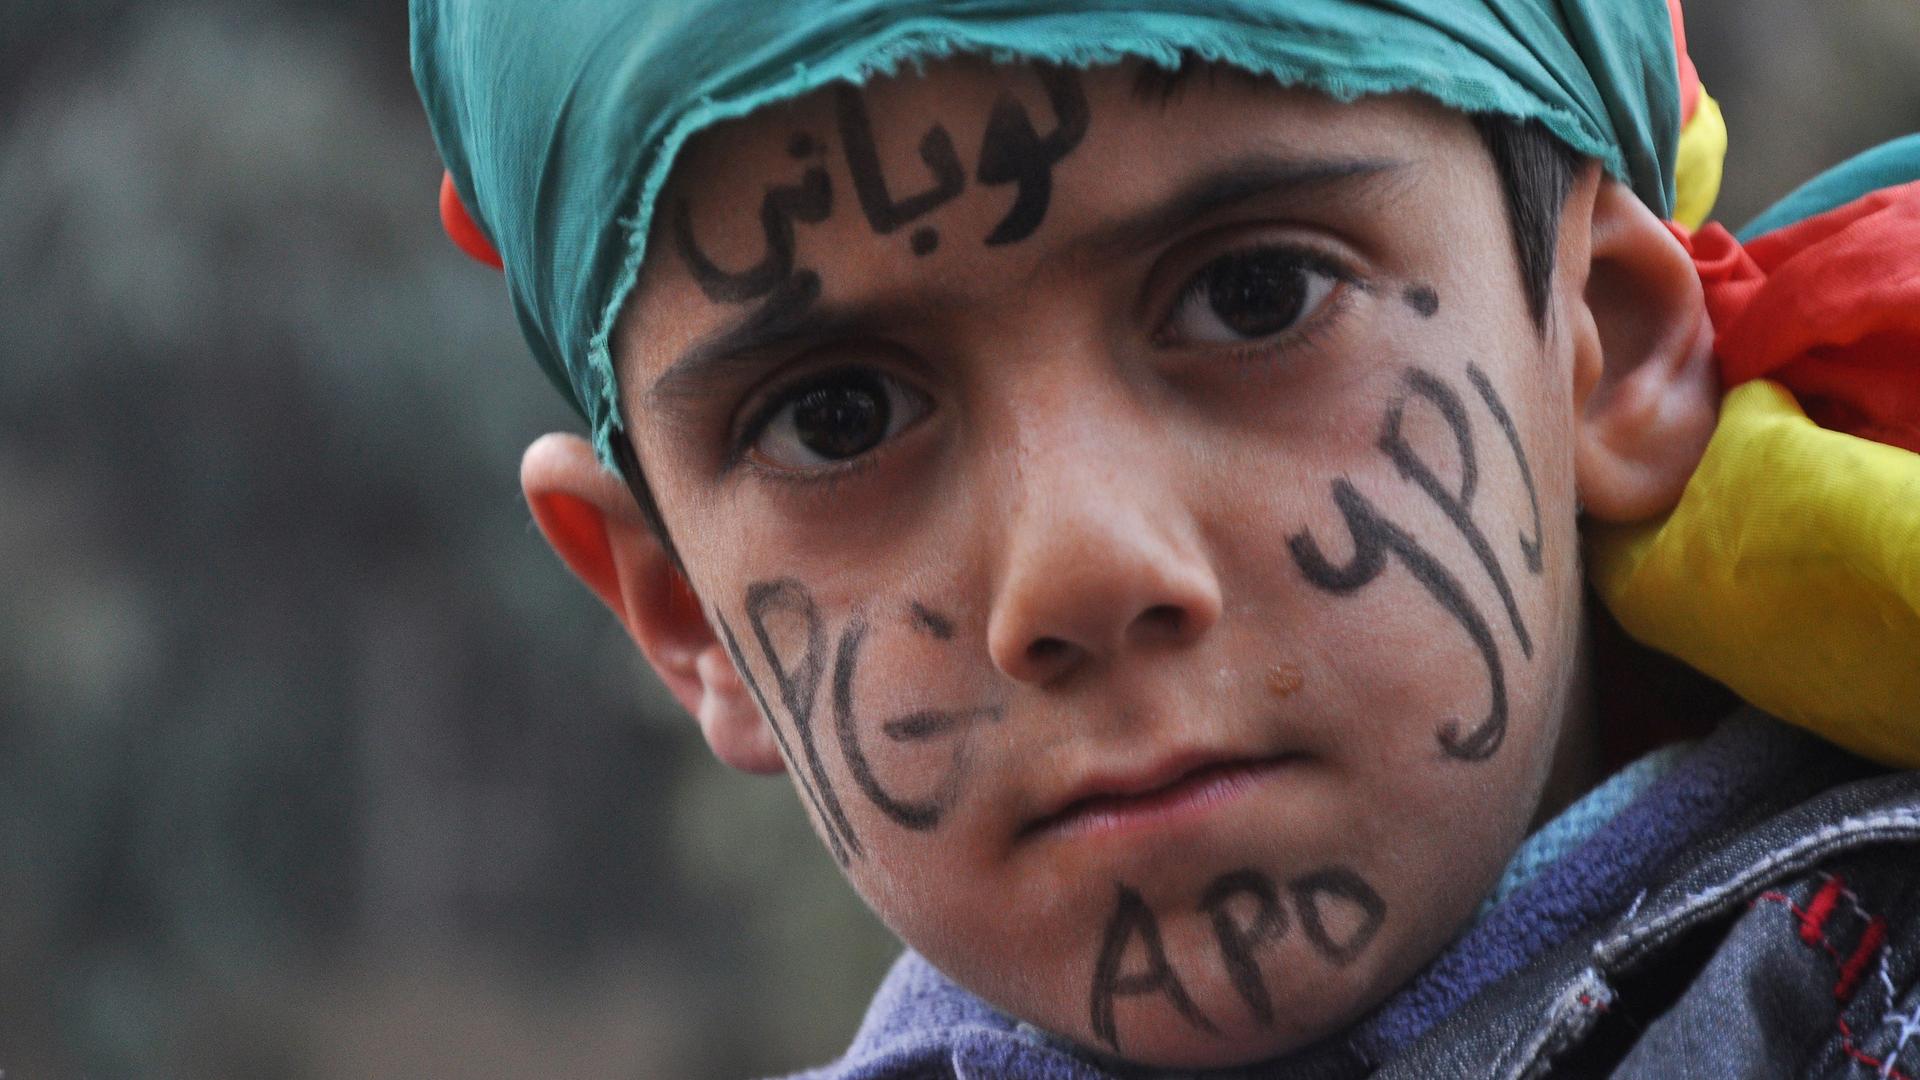 A Kurdish boy with "Kobane" written on his forehead takes part in a celebration in the Syrian Kurdish city of Qamishli, after it was reported that Kurdish forces took control of the Syrian town of Kobani, January 27, 2015.